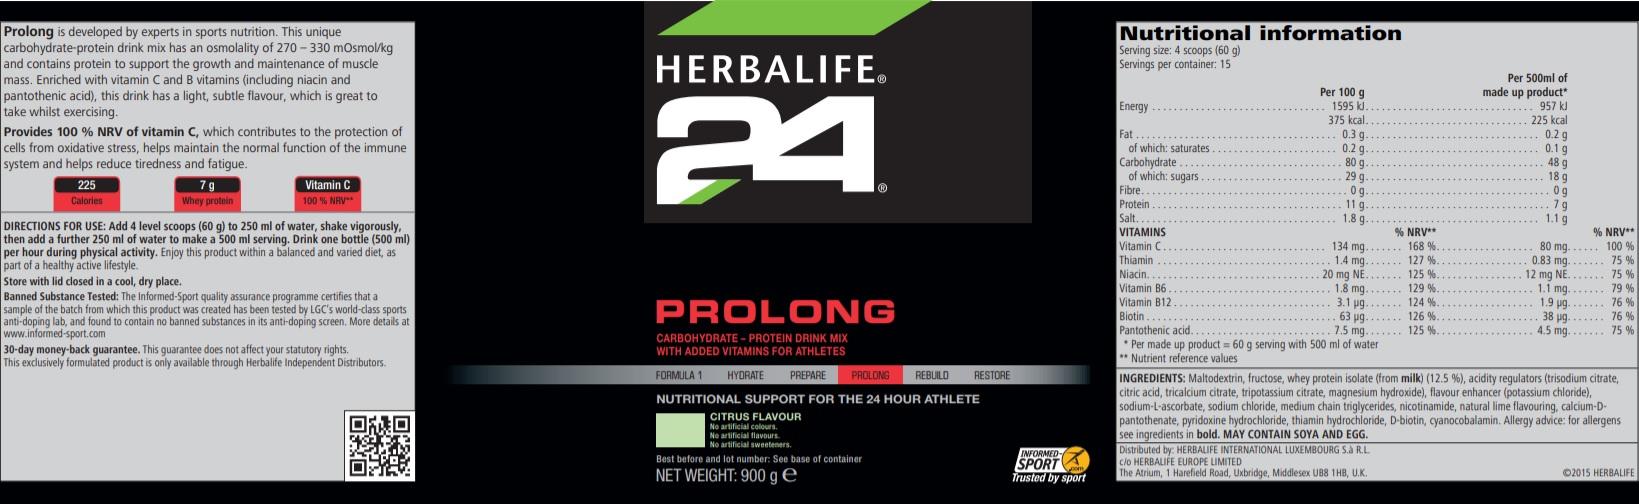 Nutritional Information Herbalife Prolong